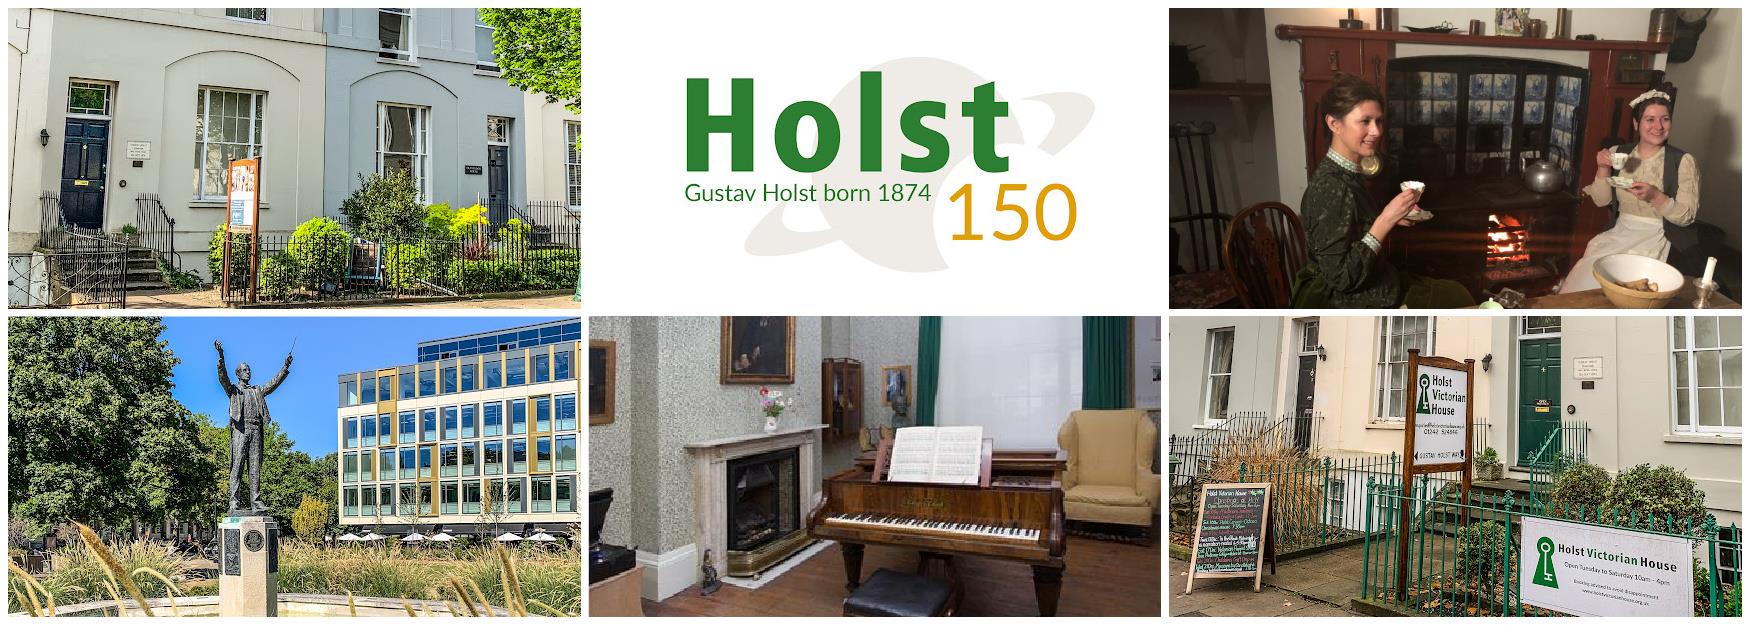 Holst 150 - collage of images featuring the Holst Victorian House.